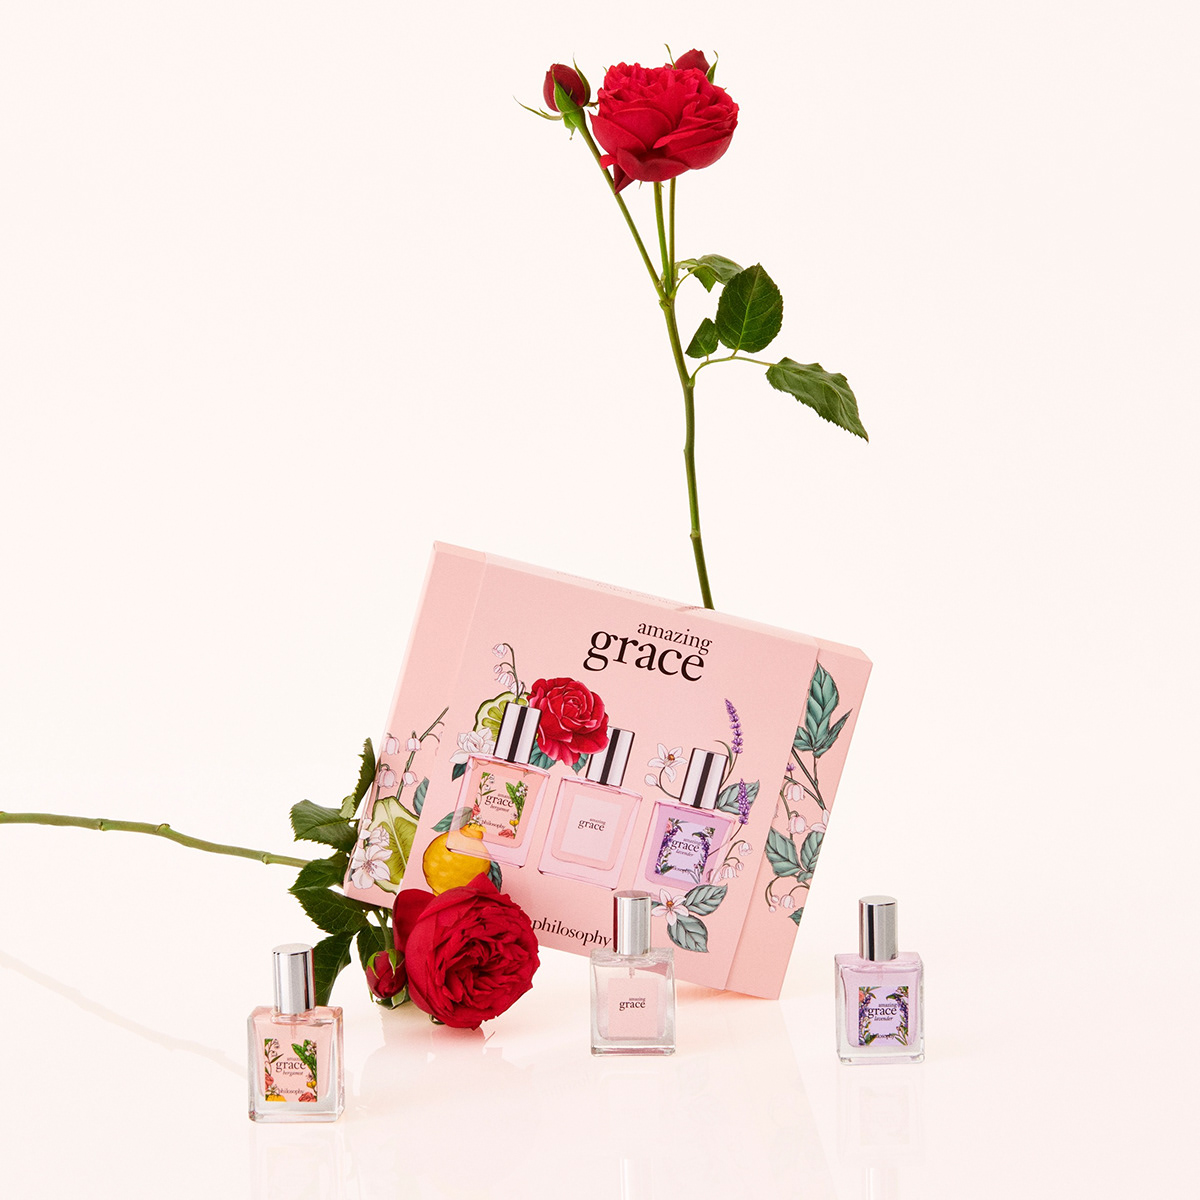 image of box of perfume surrounded by flowers.